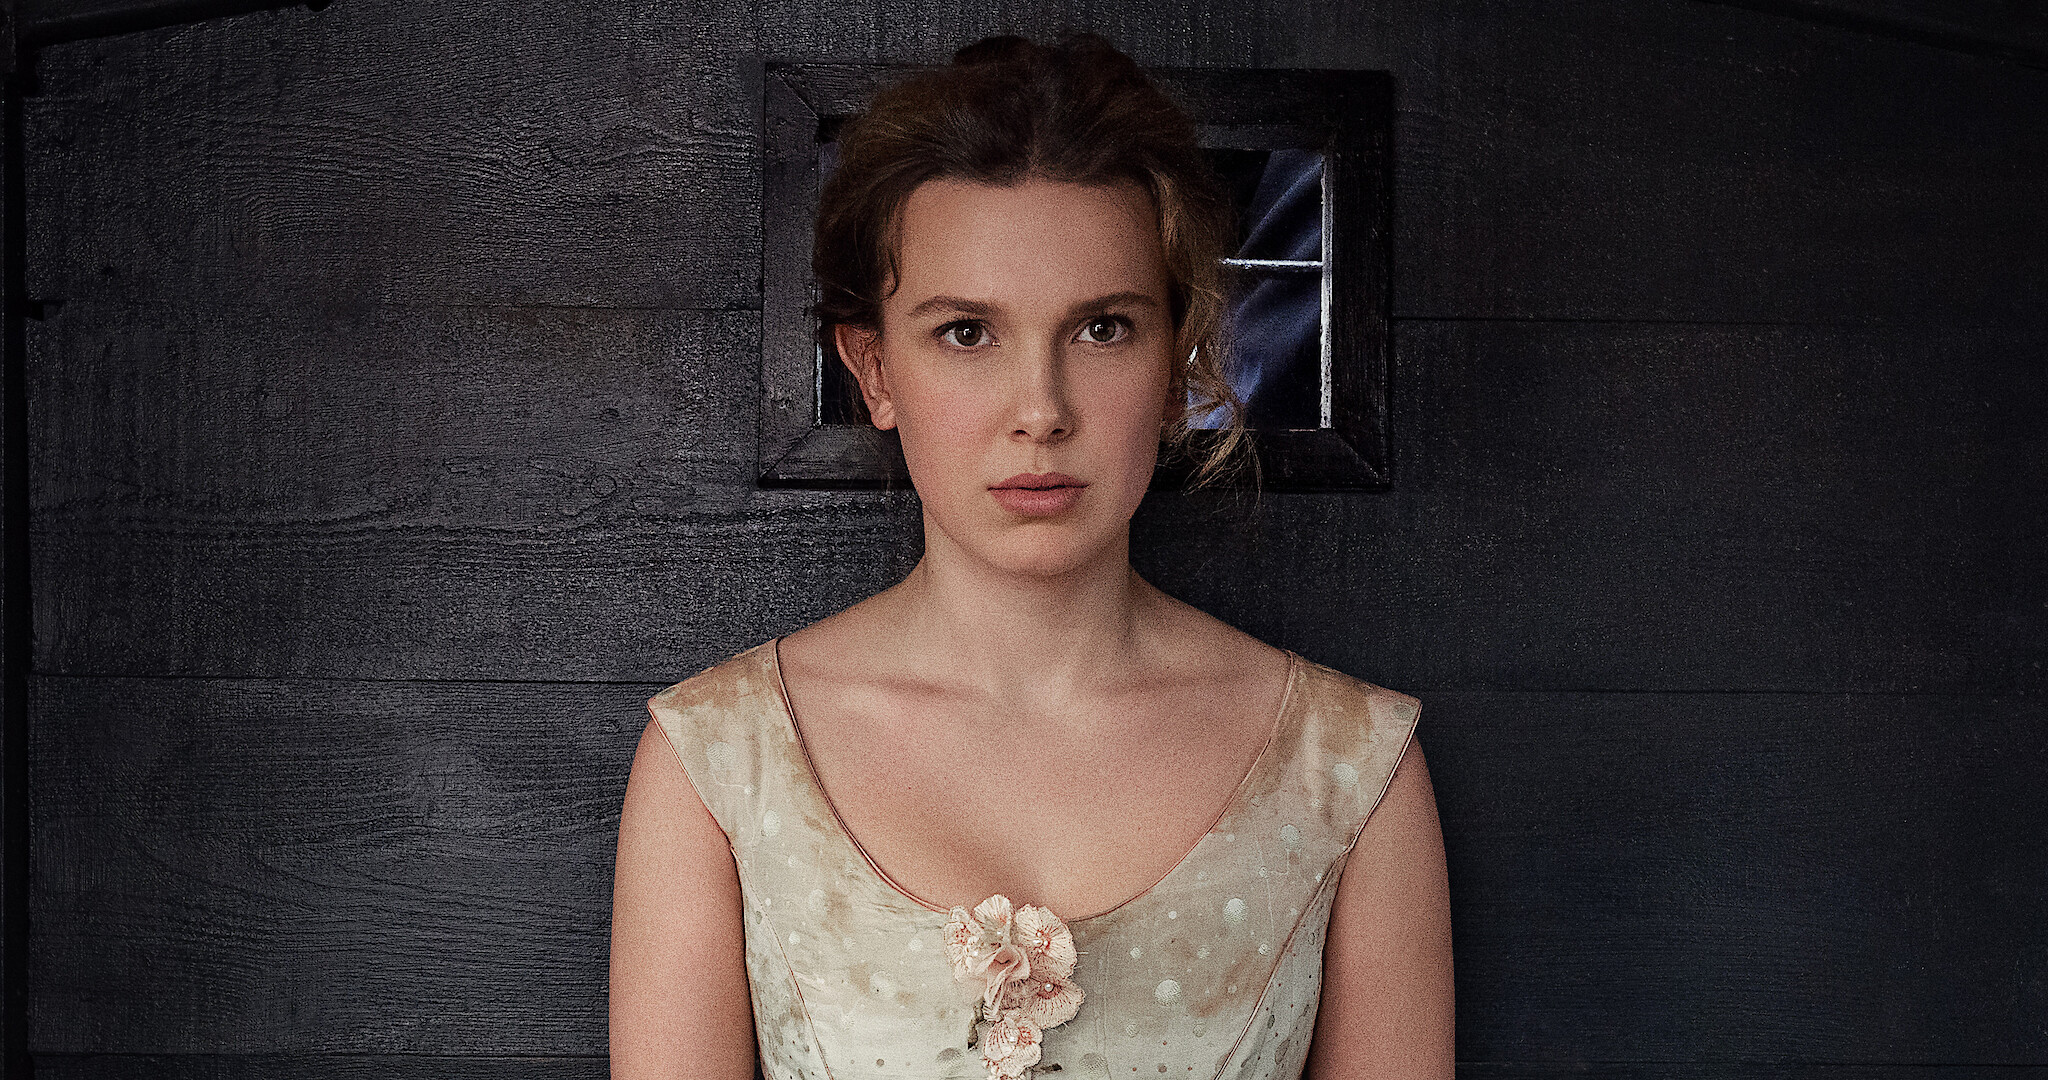 Millie Bobby Brown Enola Holmes 2 Release Date Photos picture